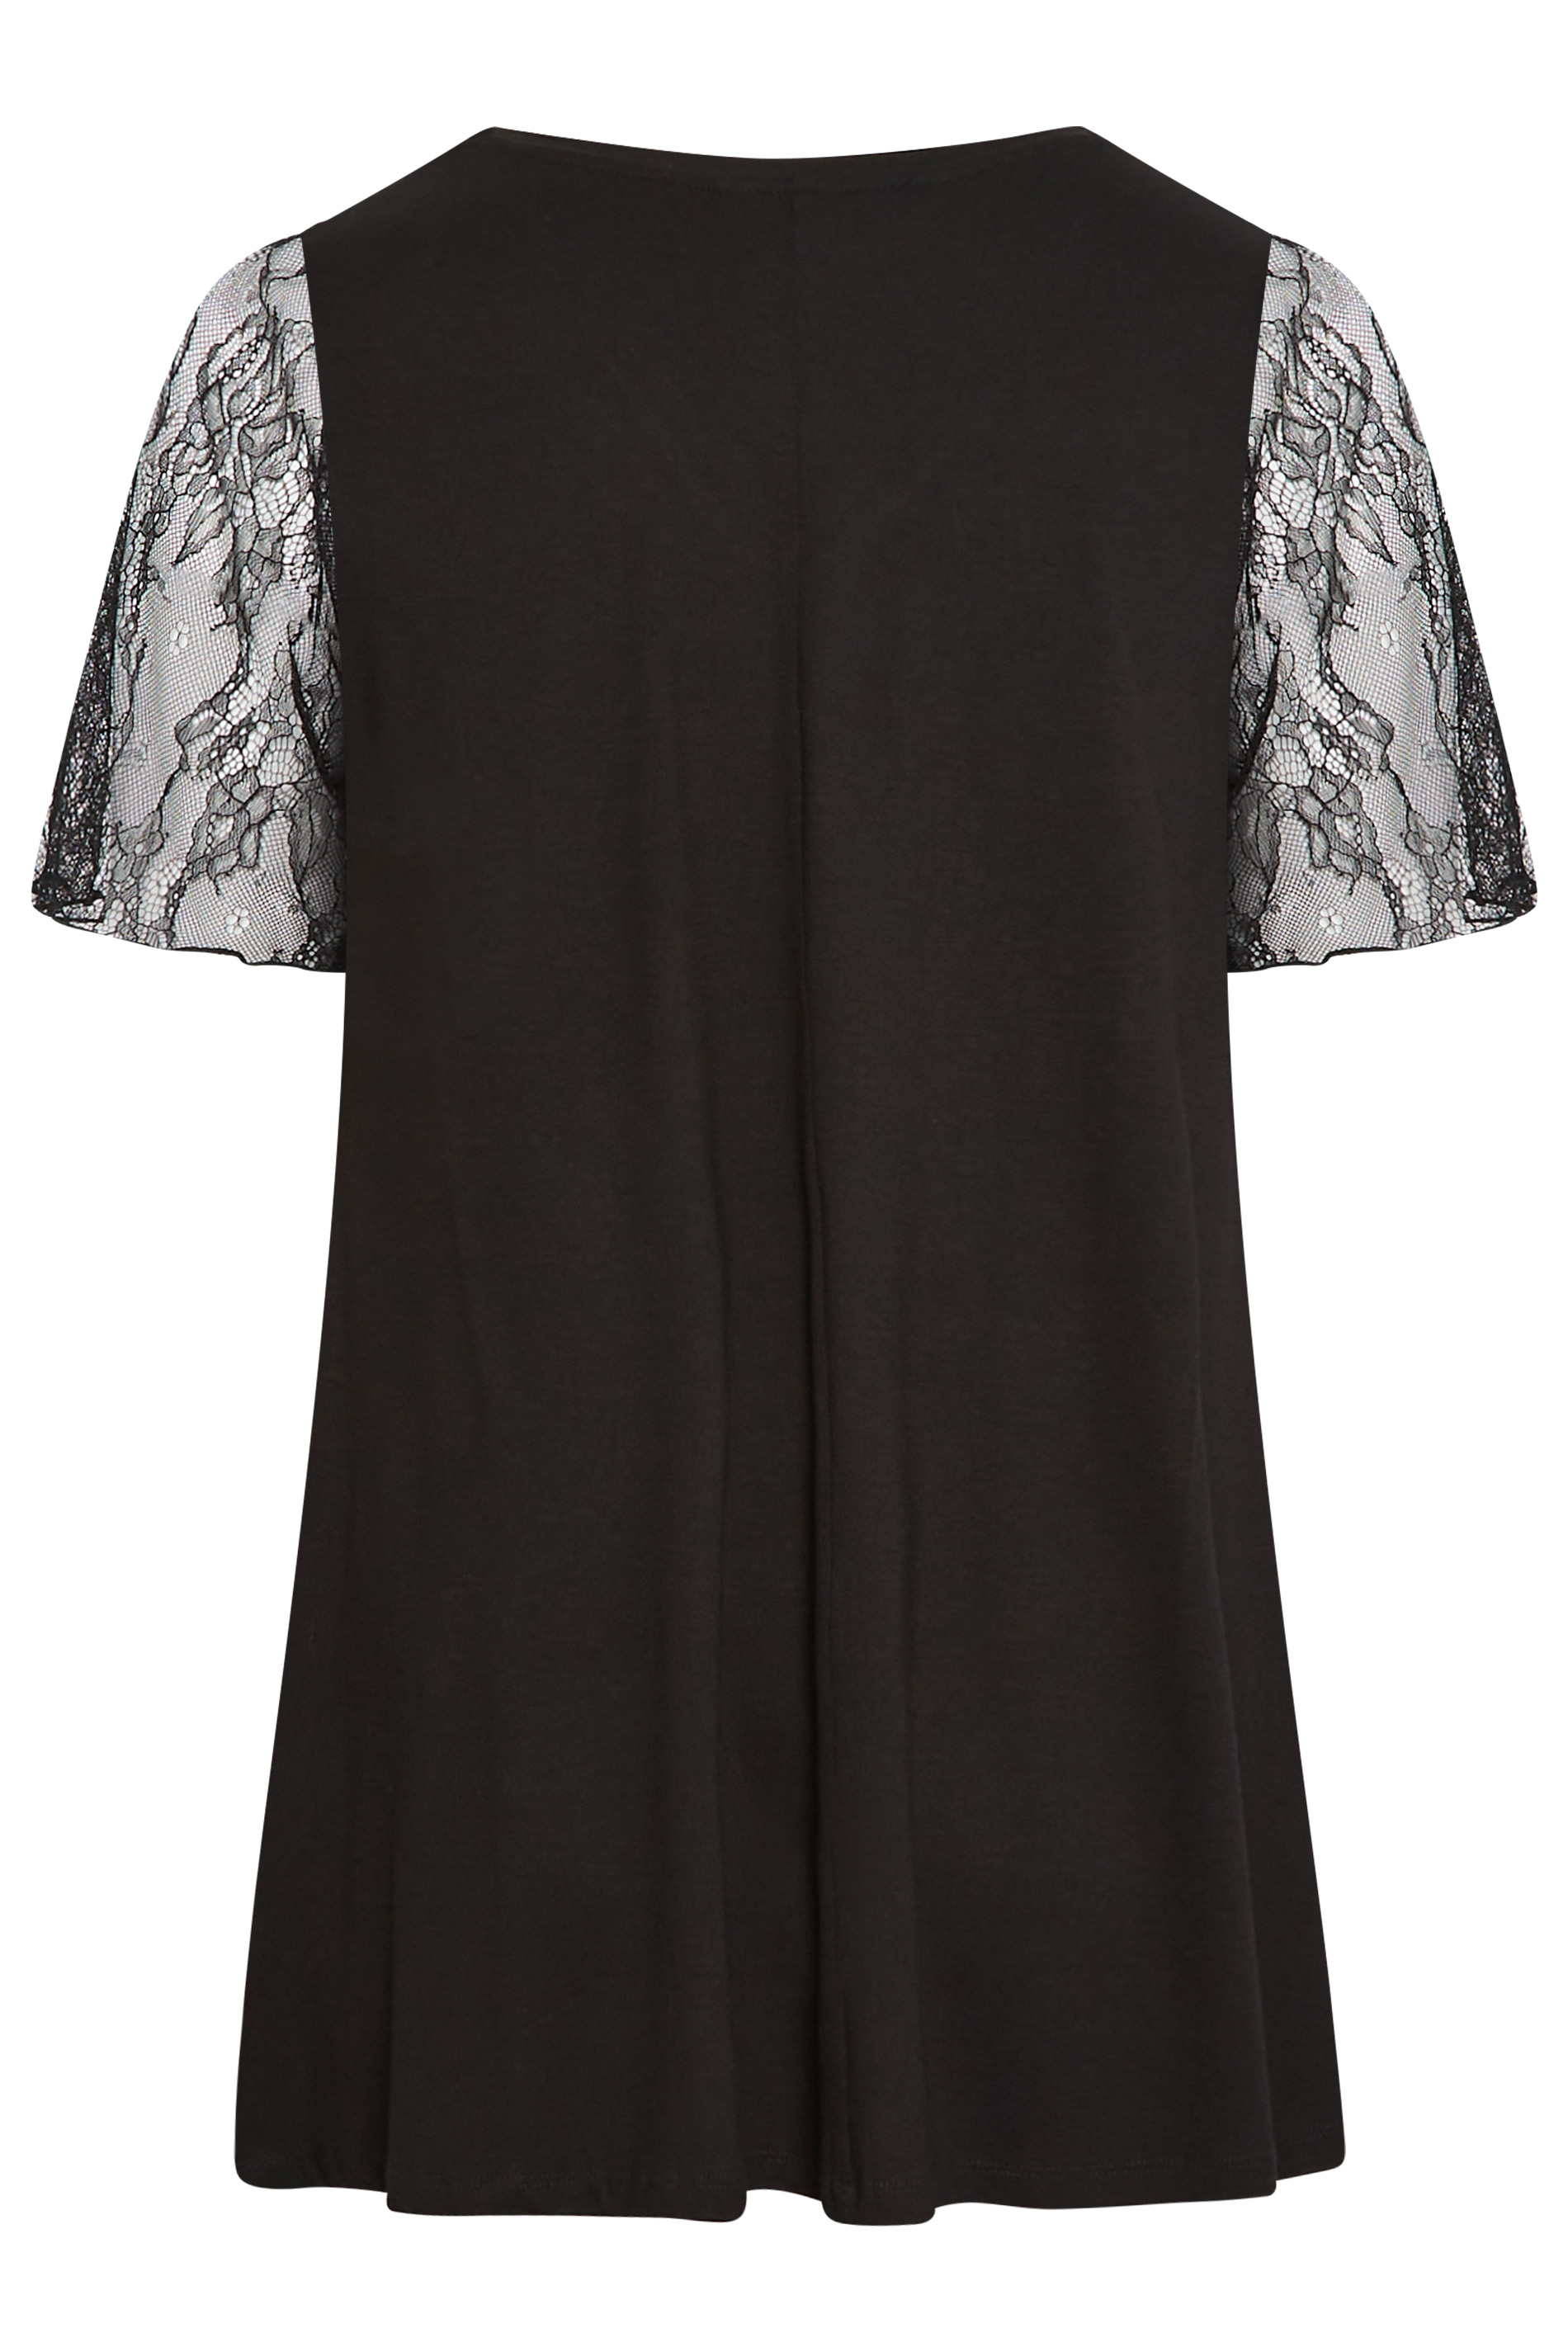 YOURS Curve Black Lace Sequin Embellished Swing Top